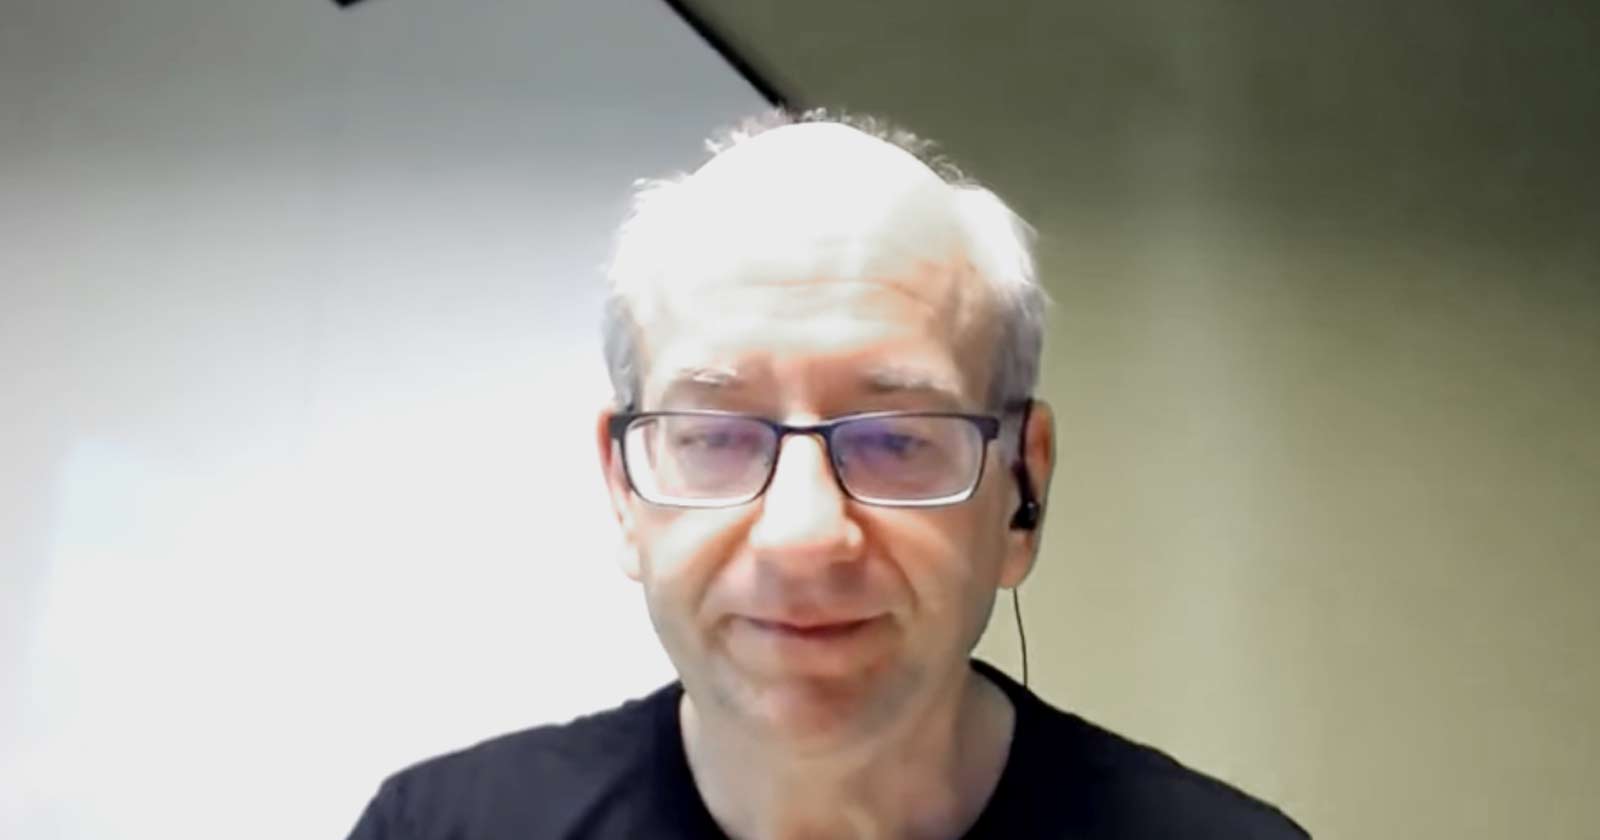 image of google's john mueller answering a question about the disavow tool and negative seo